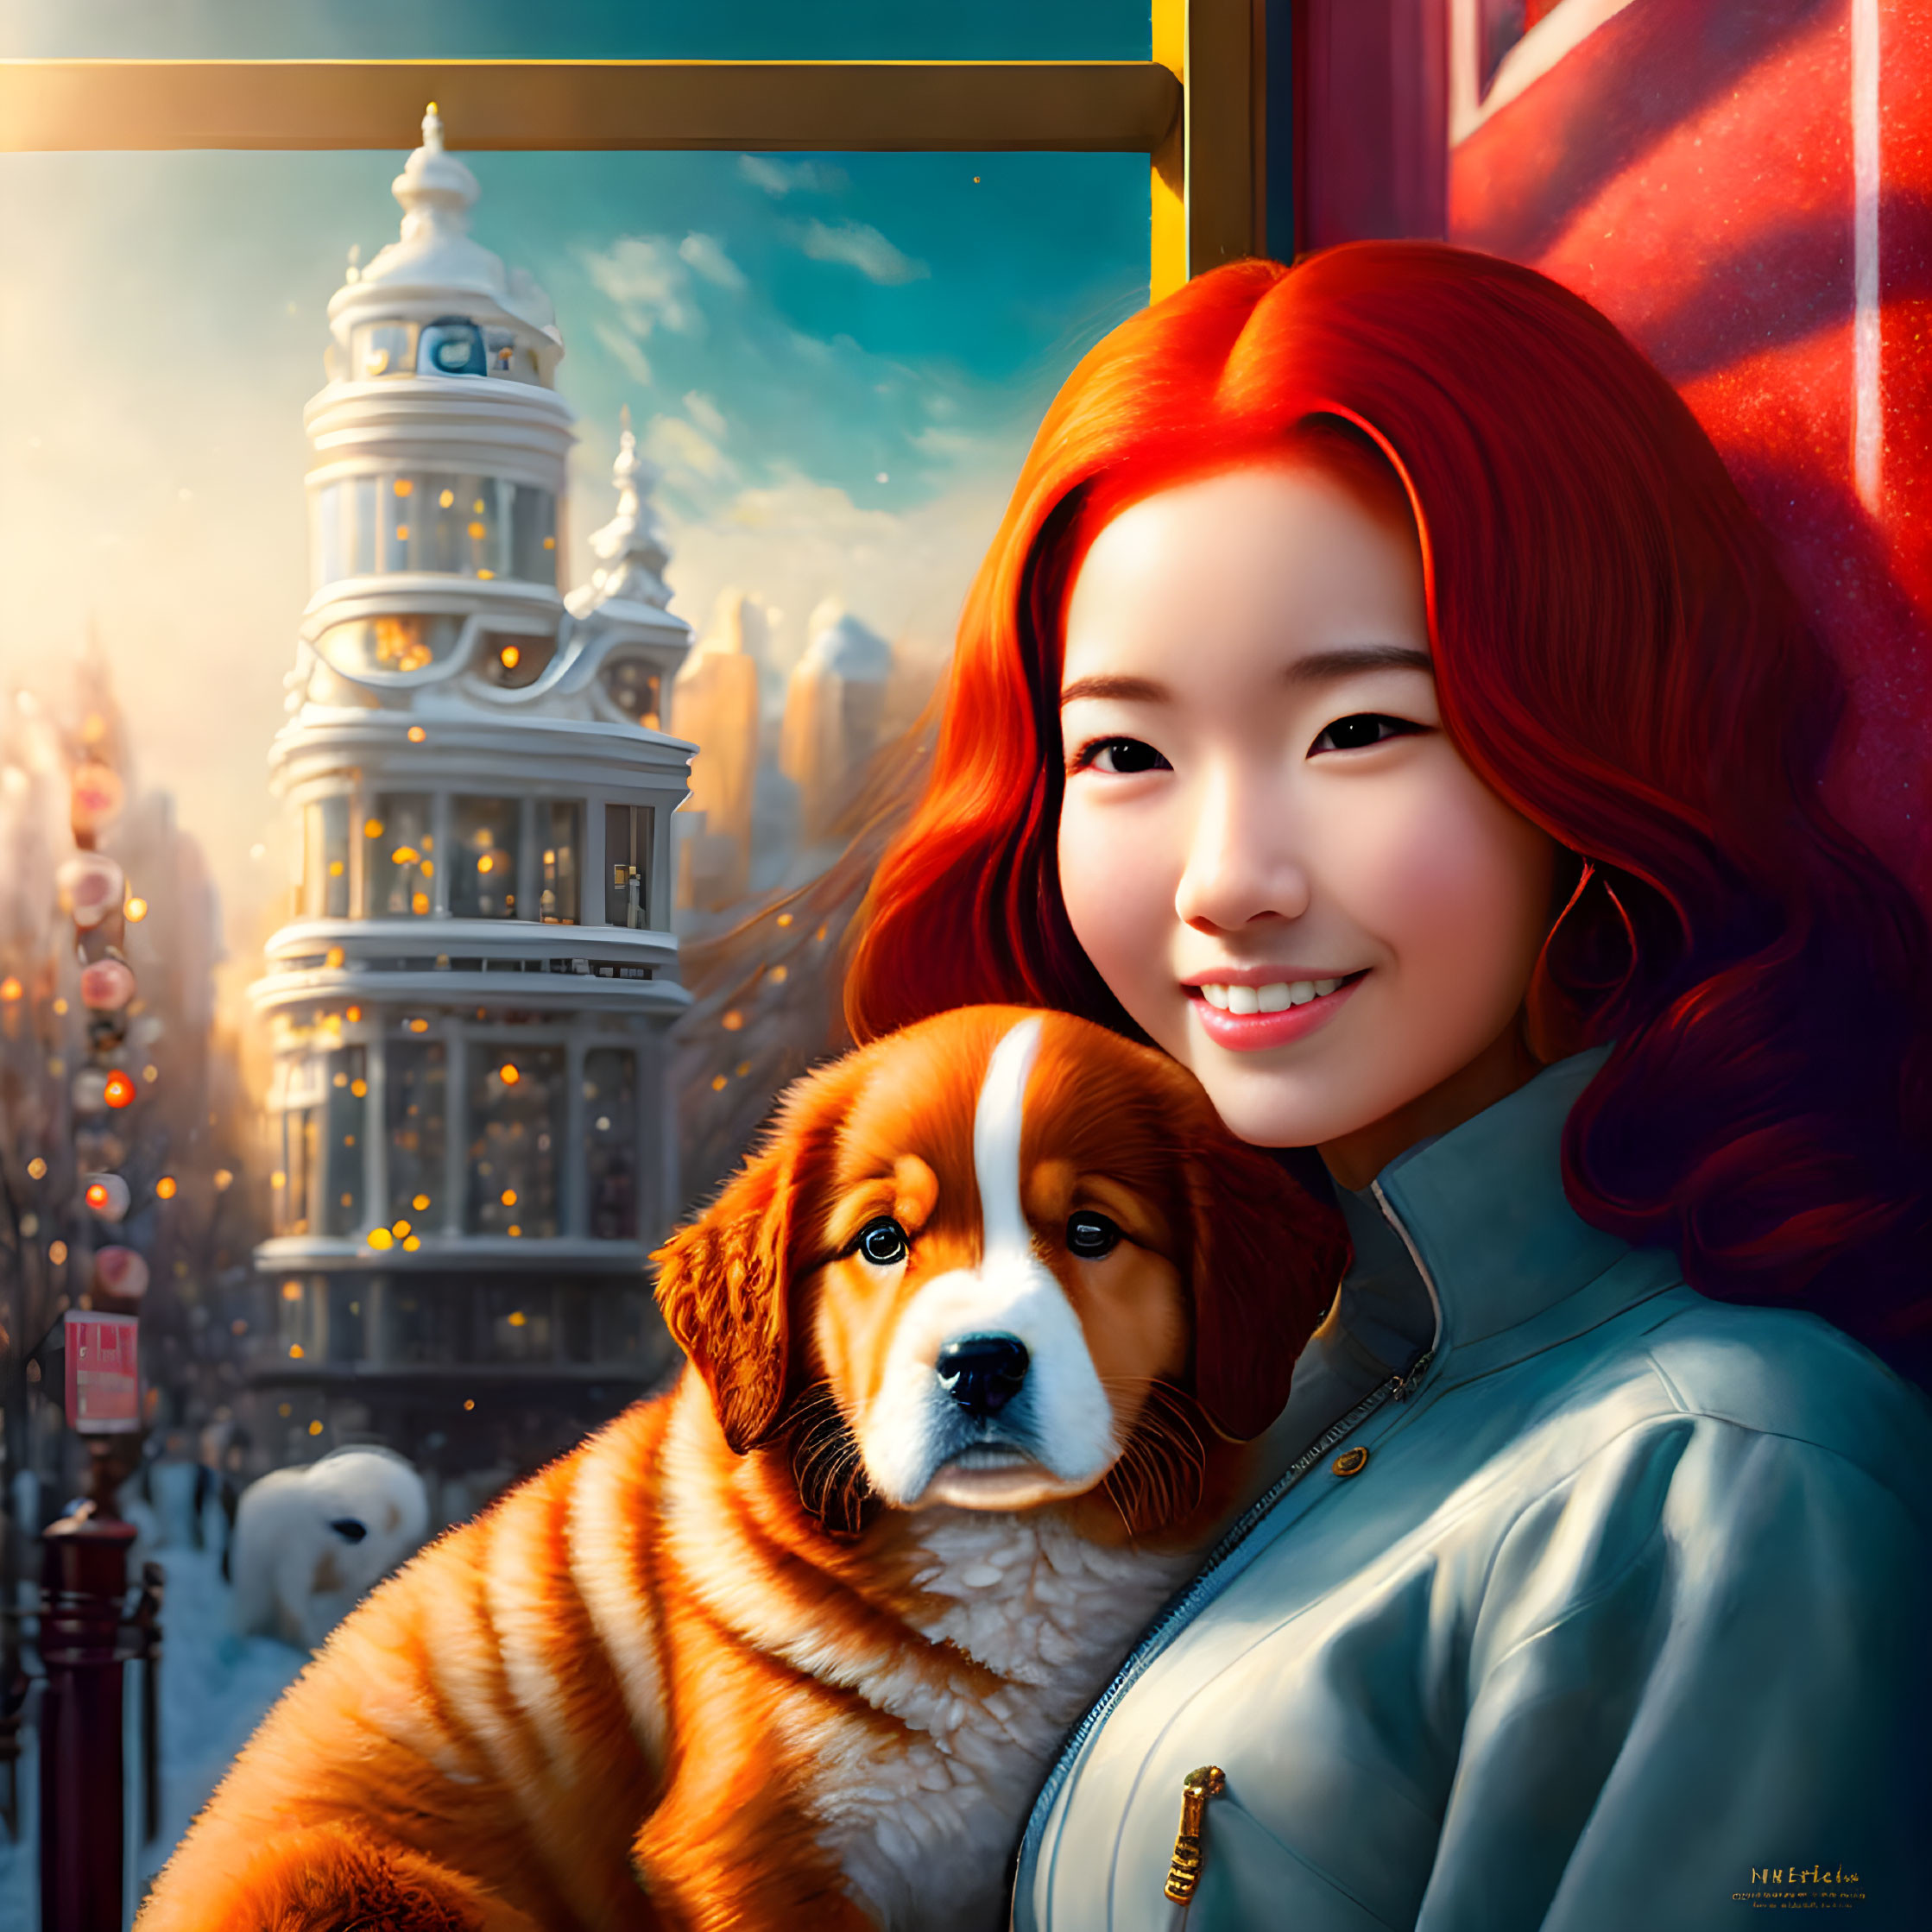 Smiling woman with red hair cuddling Bernese Mountain Dog puppy in city setting